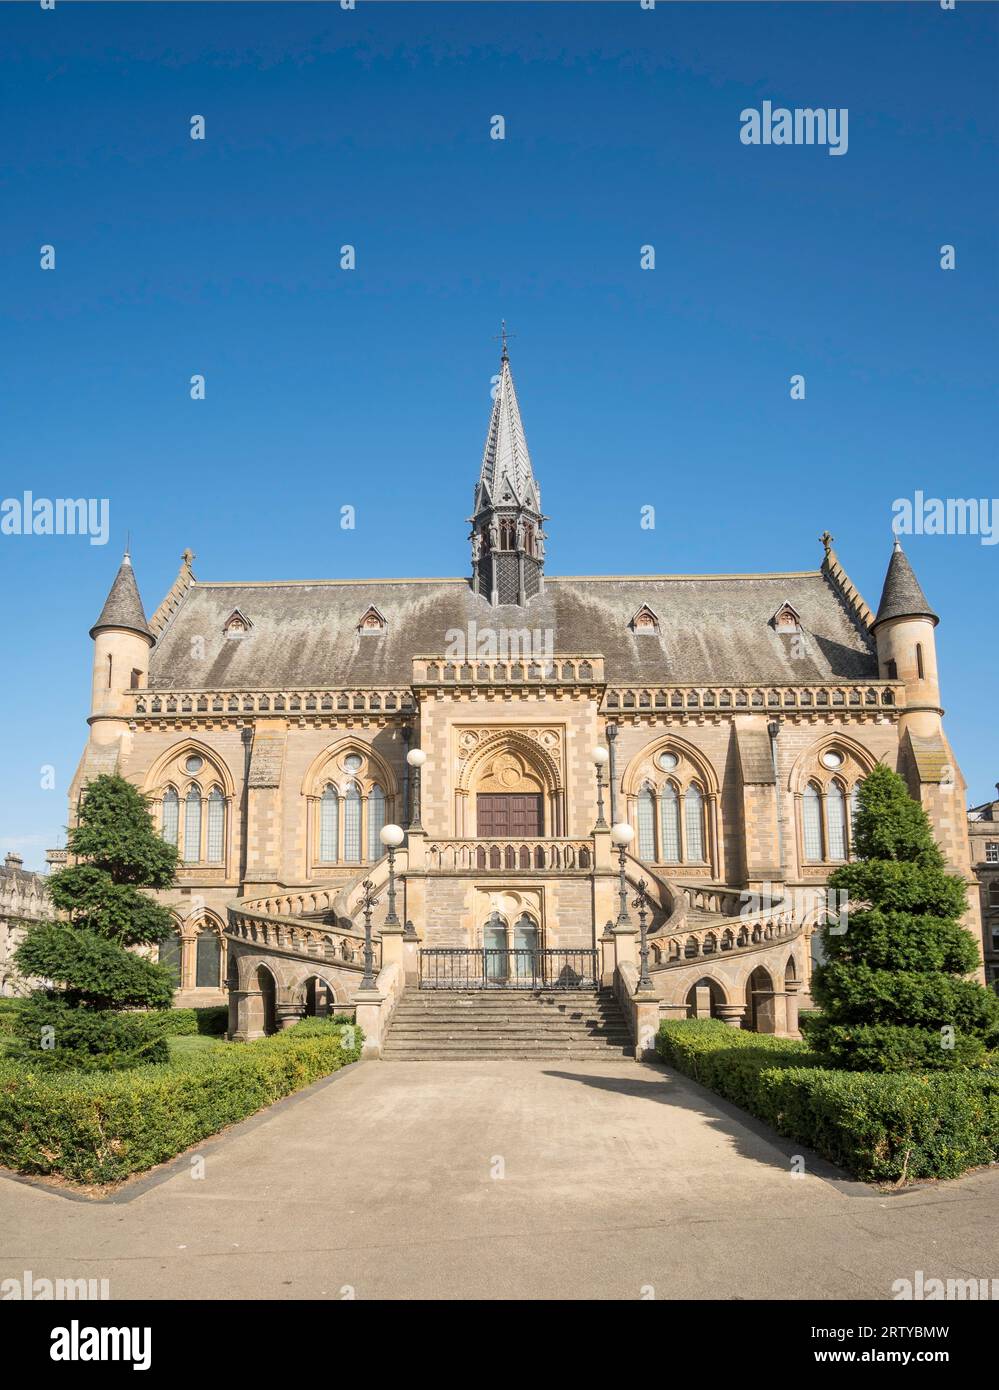 The McManus art gallery and museum in Dundee, Scotland, UK Stock Photo